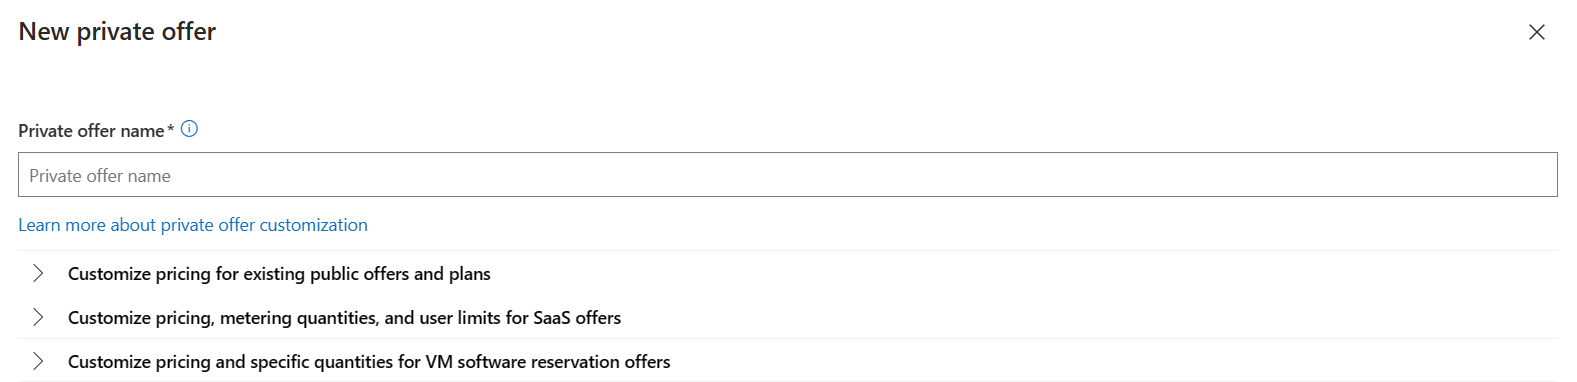 Screenshot that shows the new private offers fields in Partner Center.